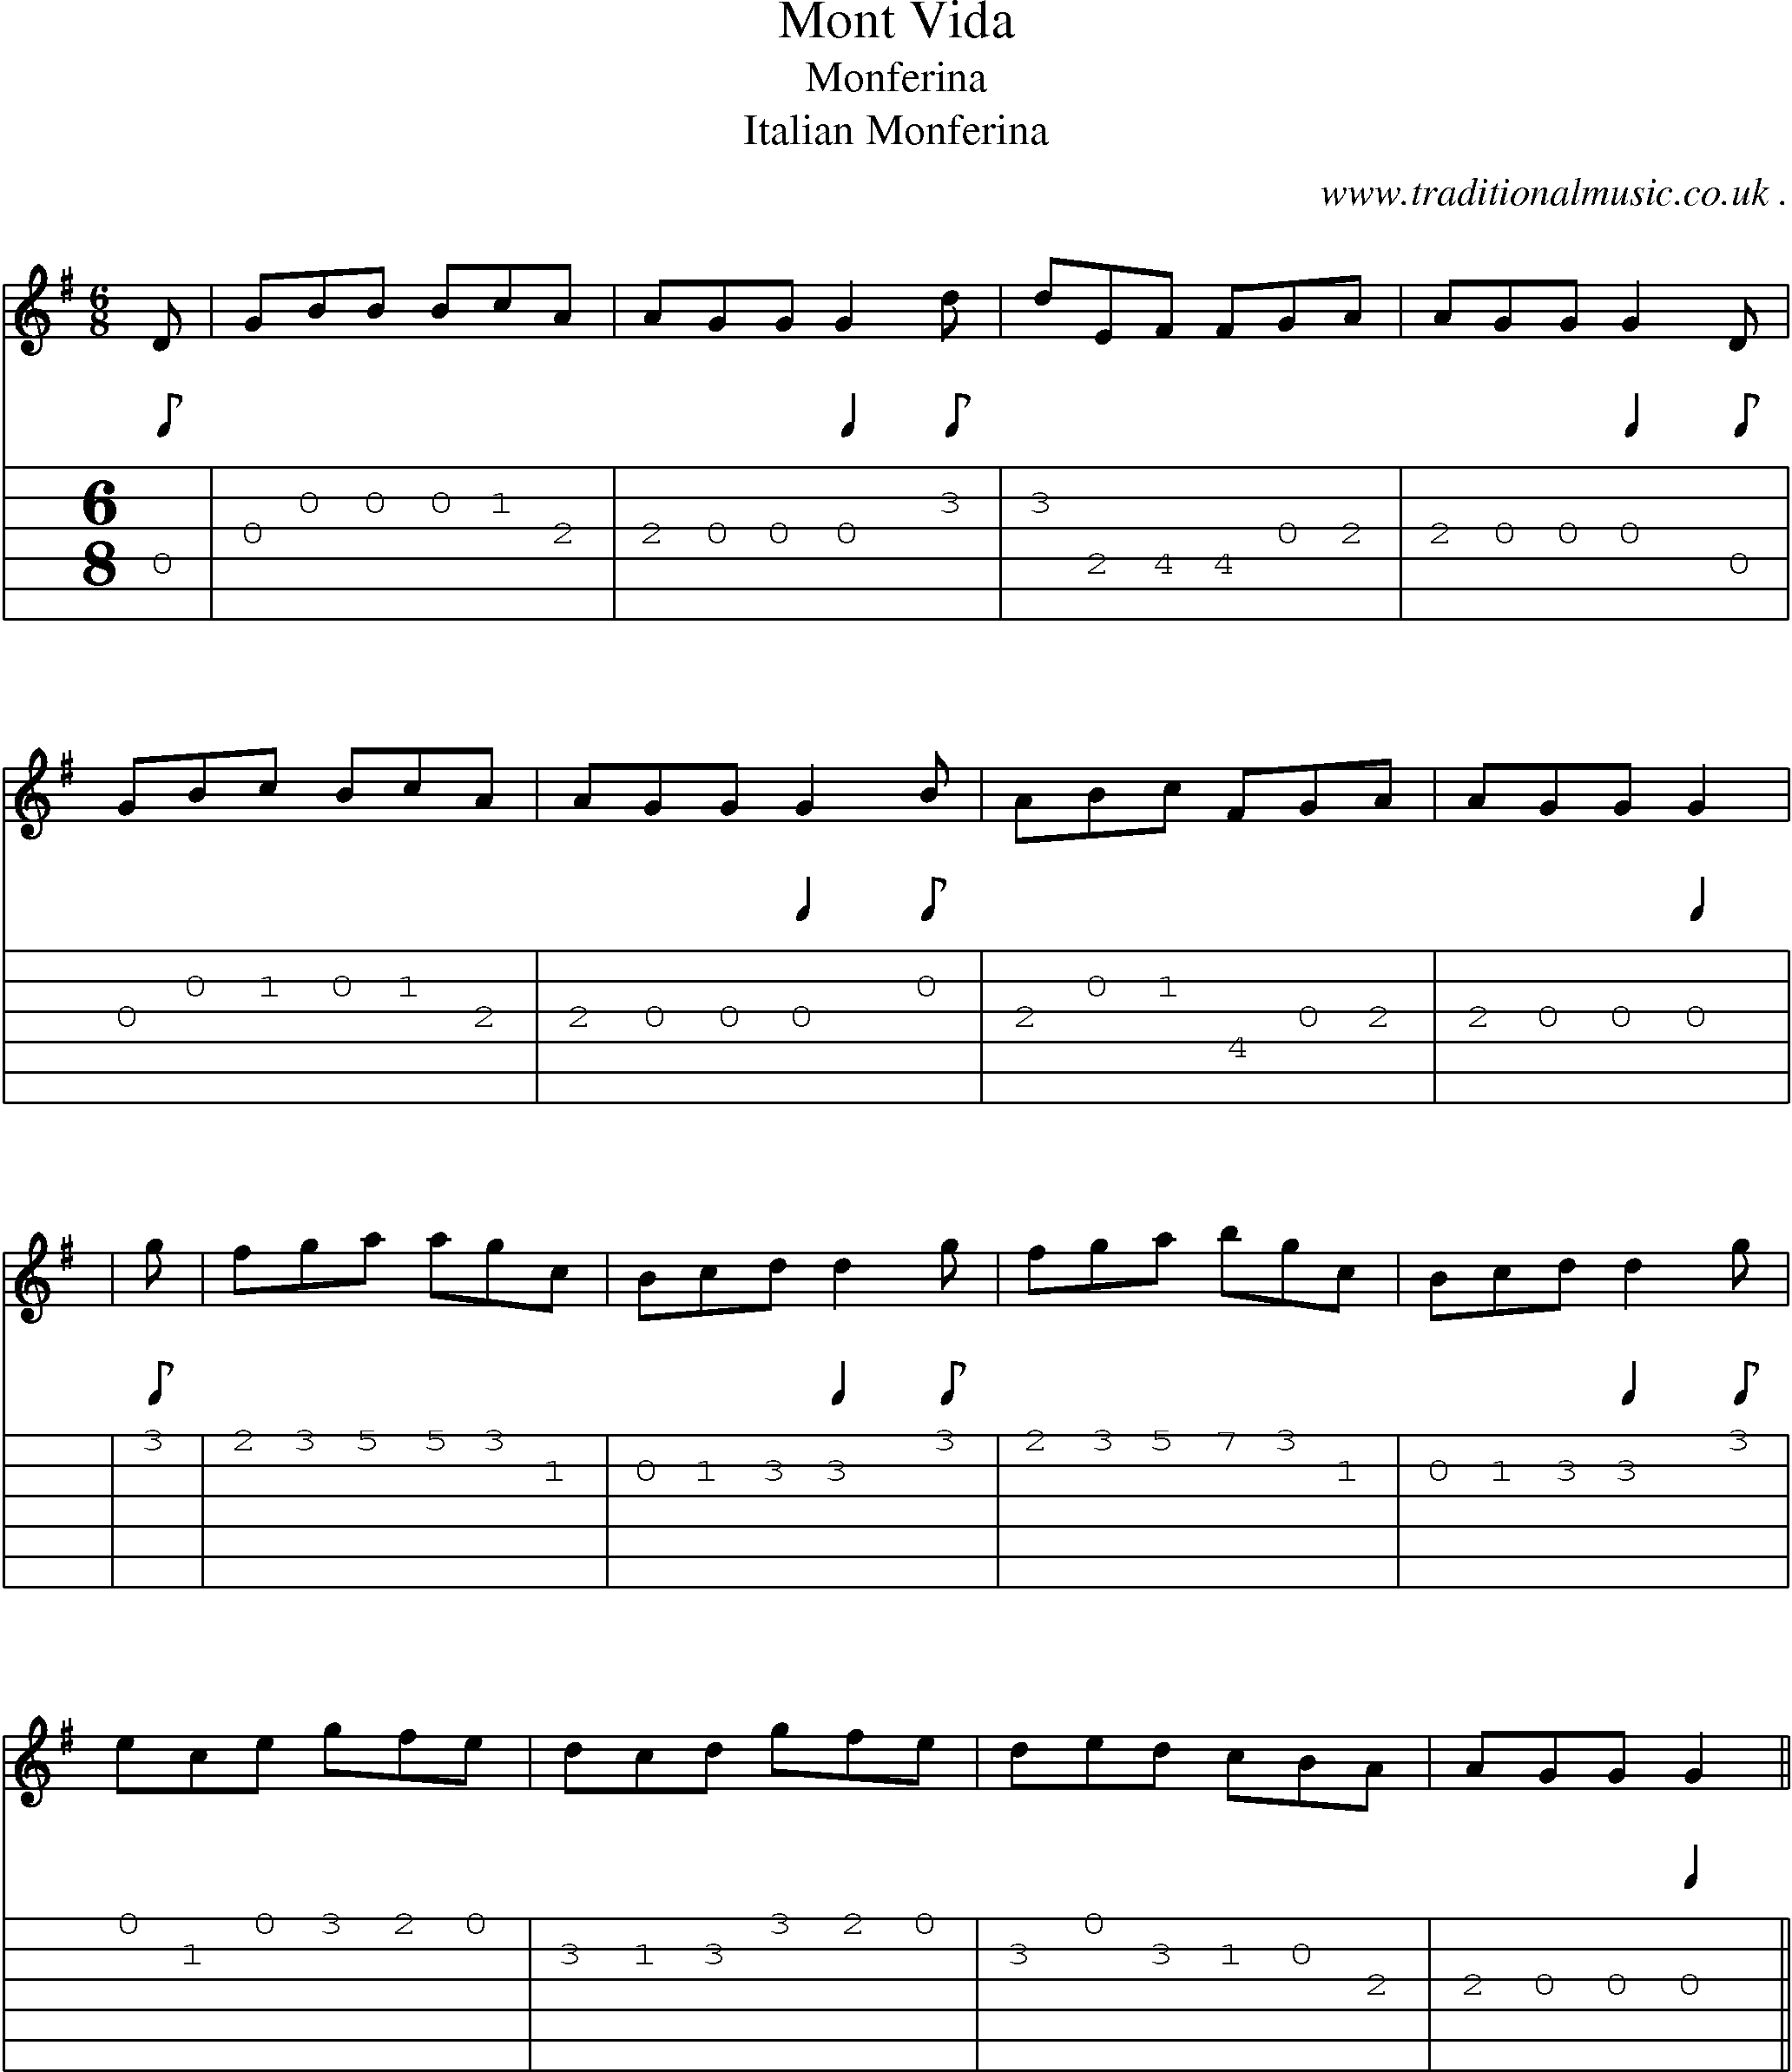 Sheet-Music and Guitar Tabs for Mont Vida